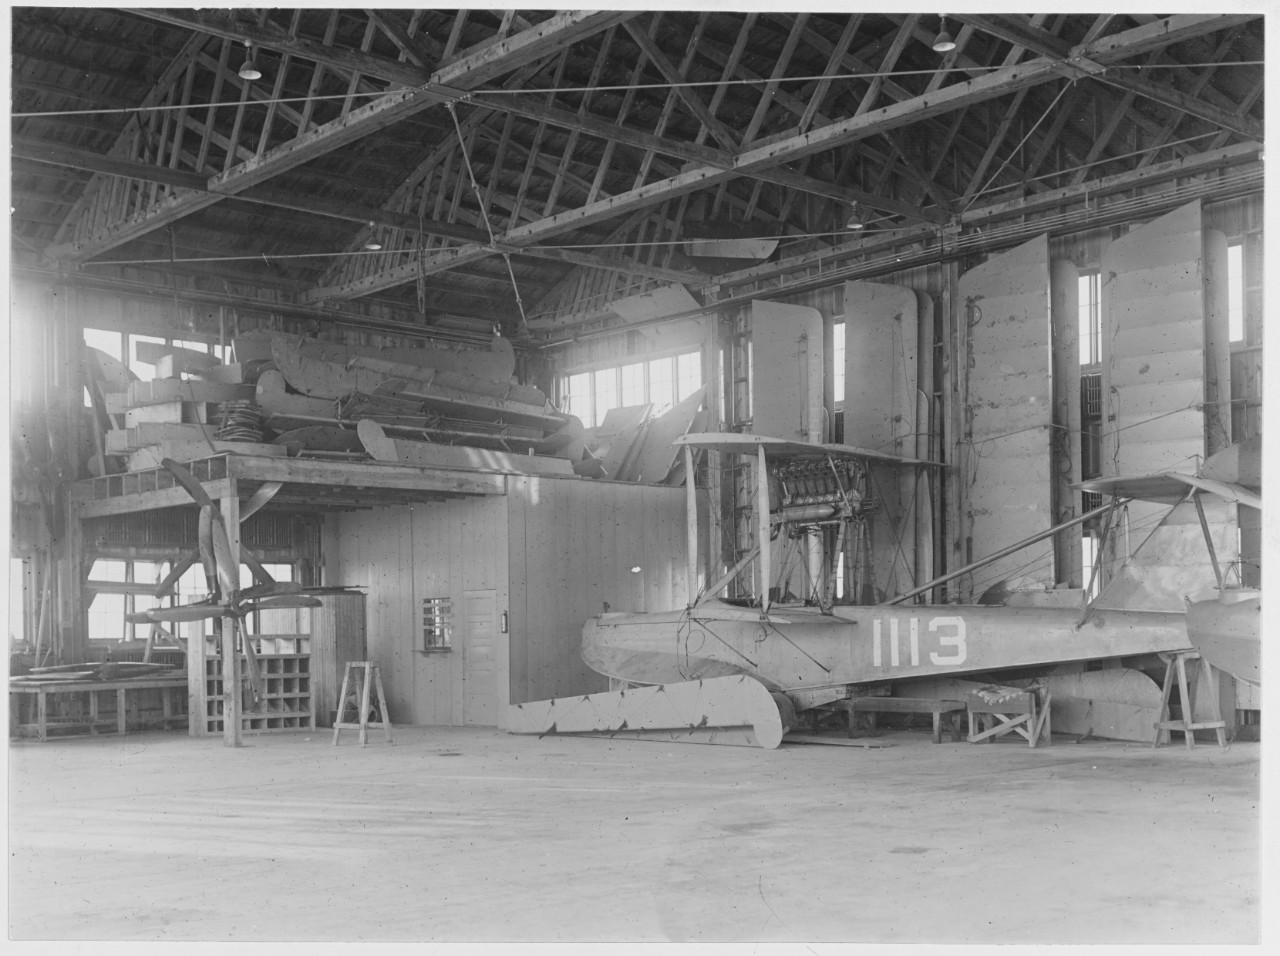 U.S. Naval Air Station, Cape May, New Jersey. Interior of seaplane hangar, January 14, 1919